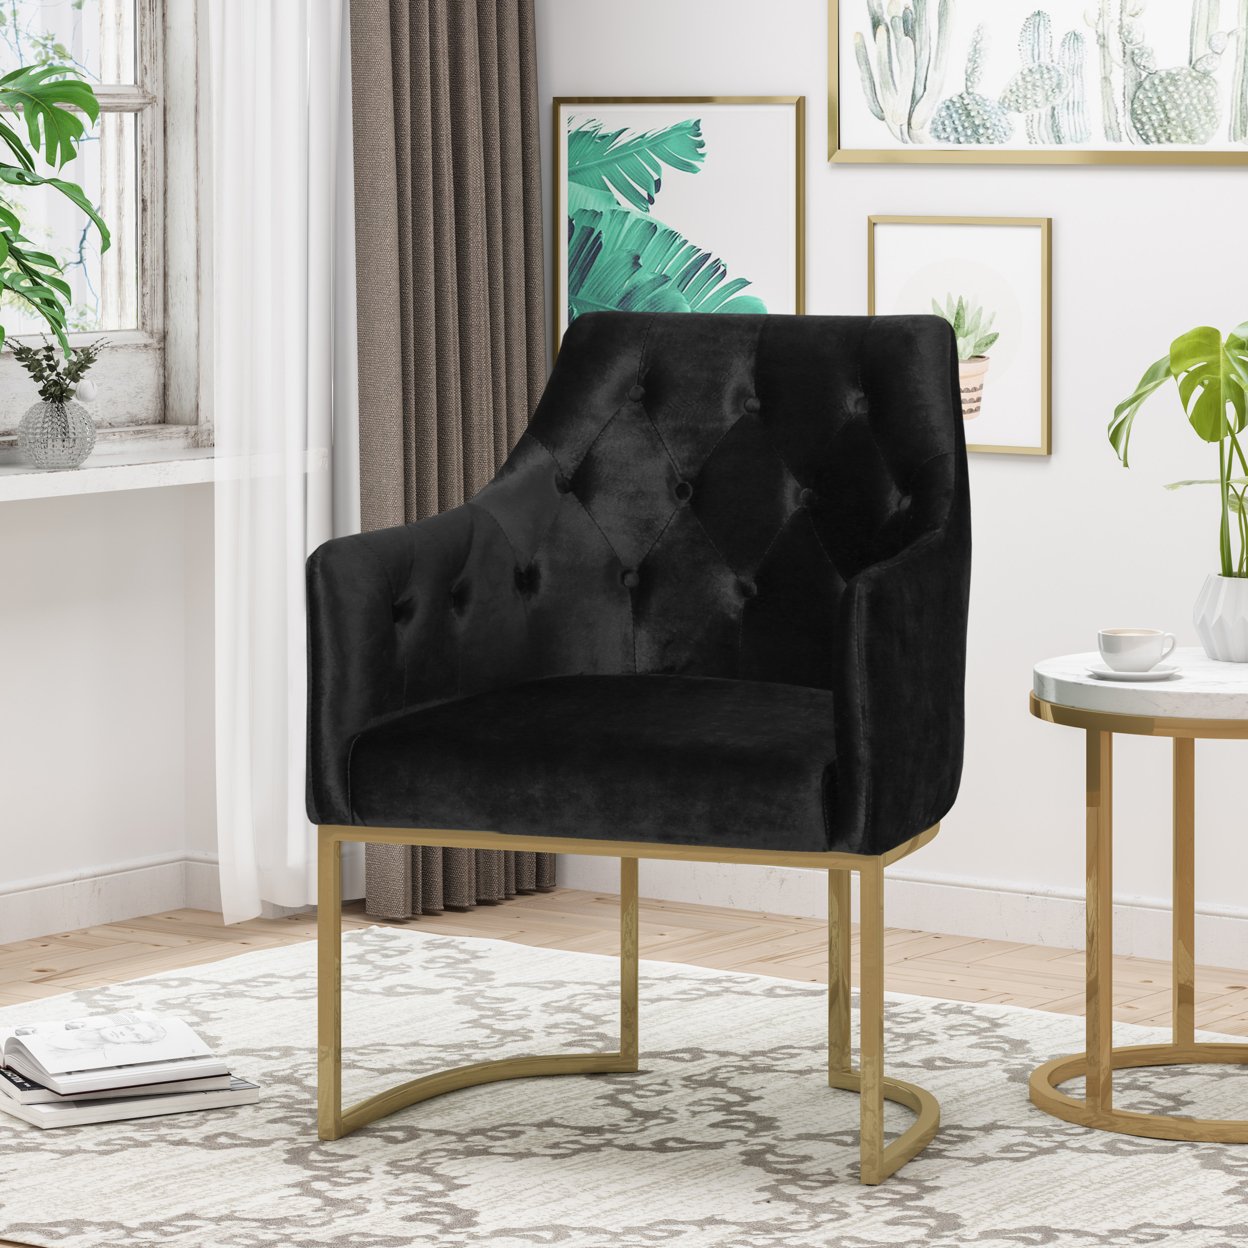 Fern Modern Tufted Glam Accent Chair With Velvet Cushions And U-Shaped Base - Black + Gold